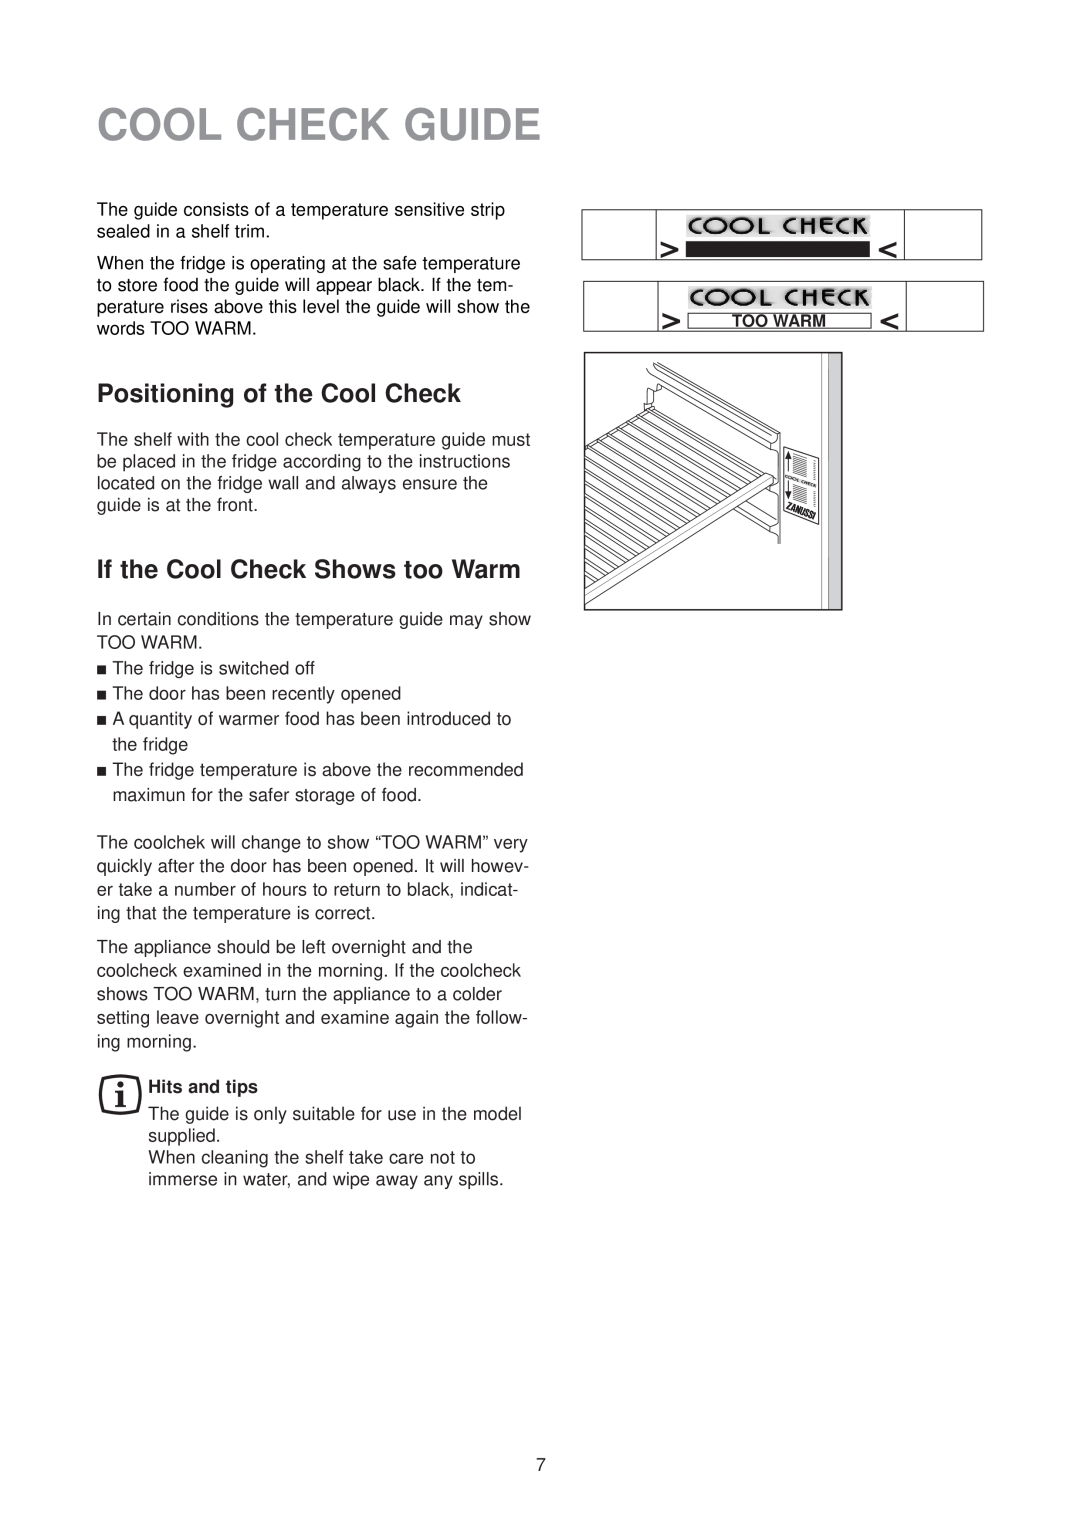 Zanussi ZU 7155 manual Cool Check Guide, Positioning of the Cool Check, If the Cool Check Shows too Warm, Hits and tips 